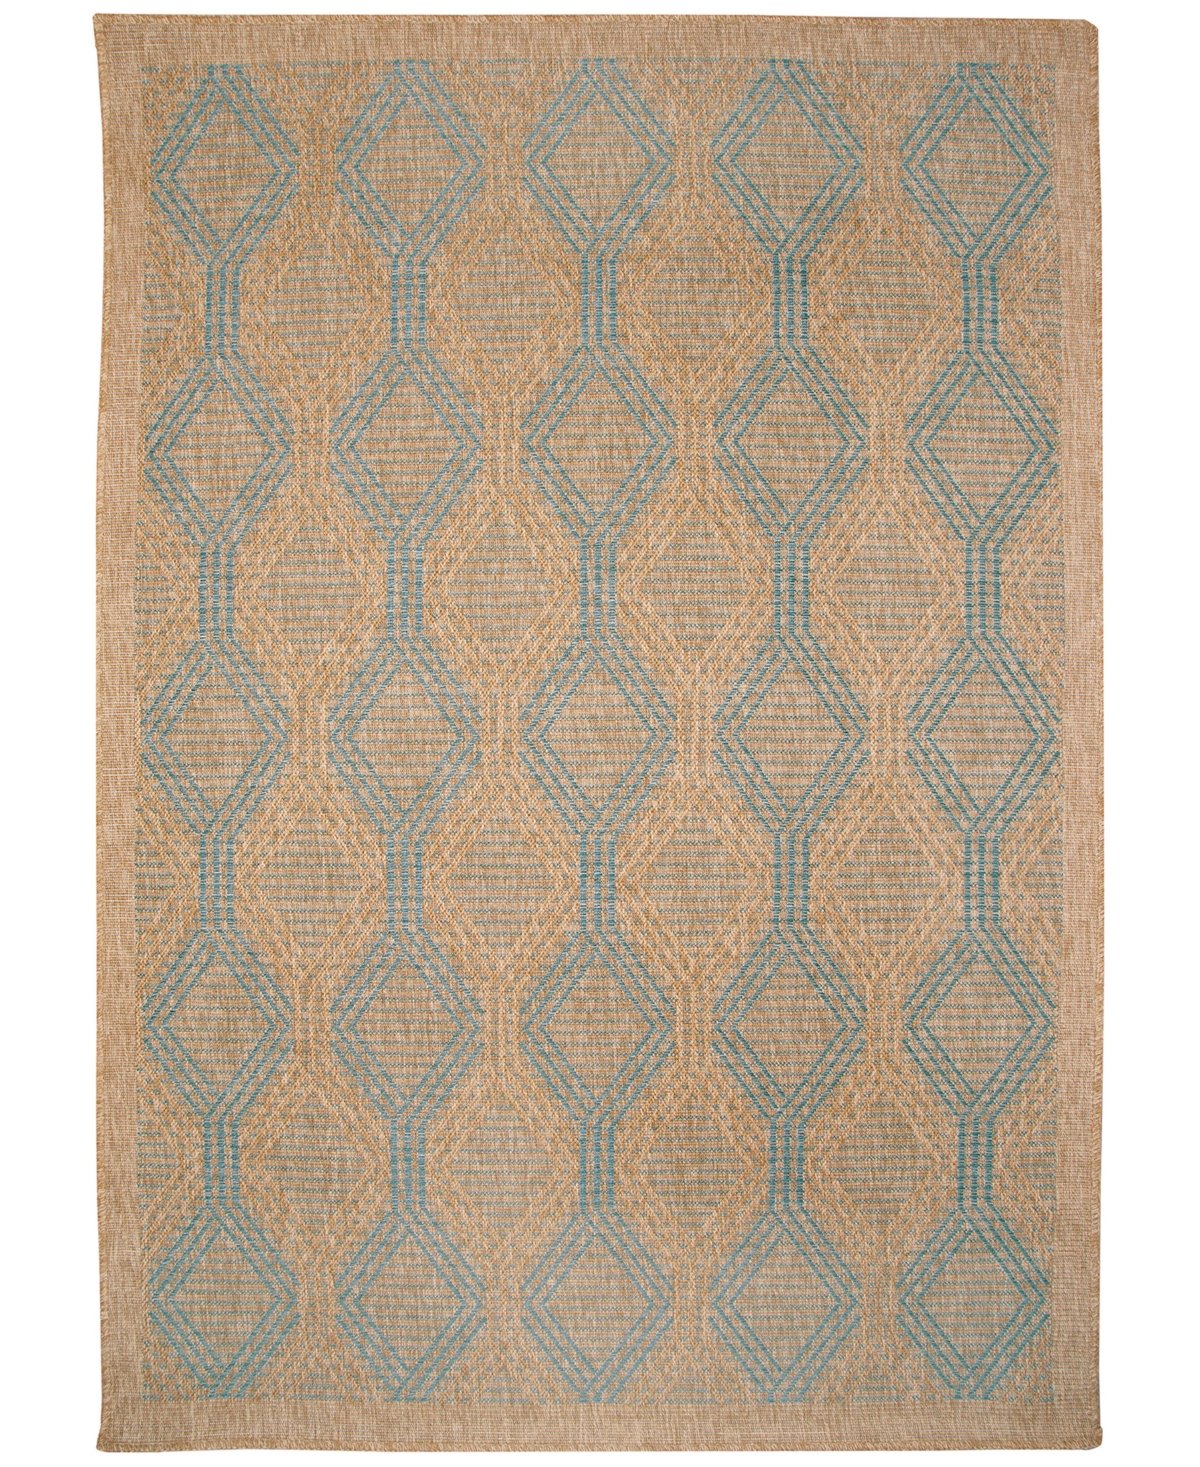 Liora Manne Sahara Links 5'3" X 7'3" Outdoor Area Rug In Turquoise